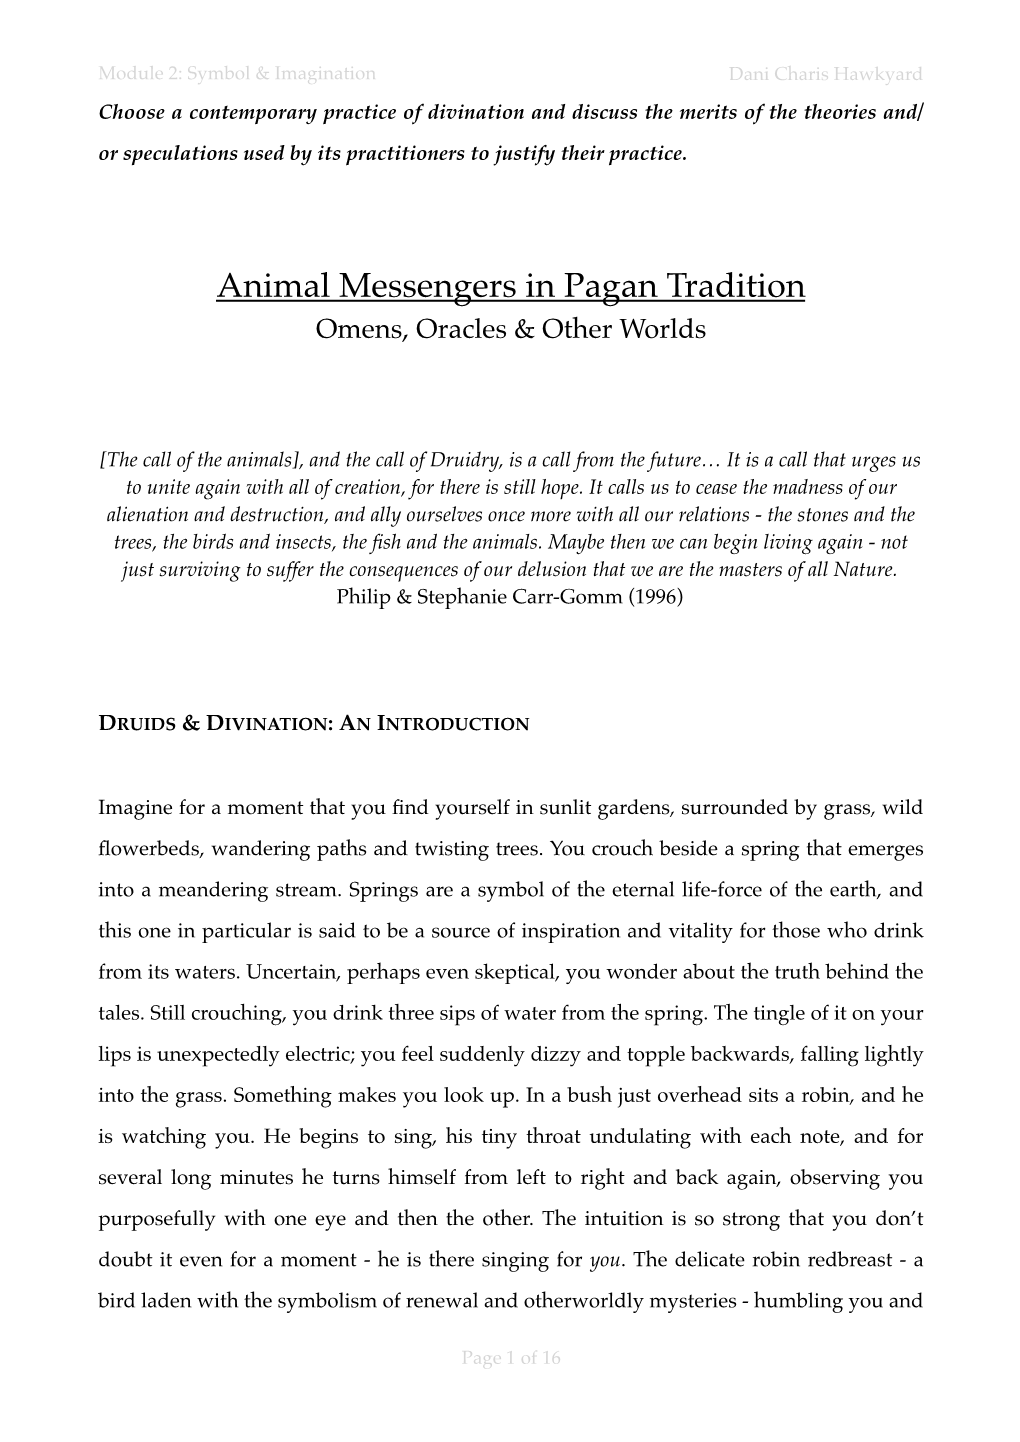 Animal Messengers in Pagan Tradition Omens, Oracles & Other Worlds